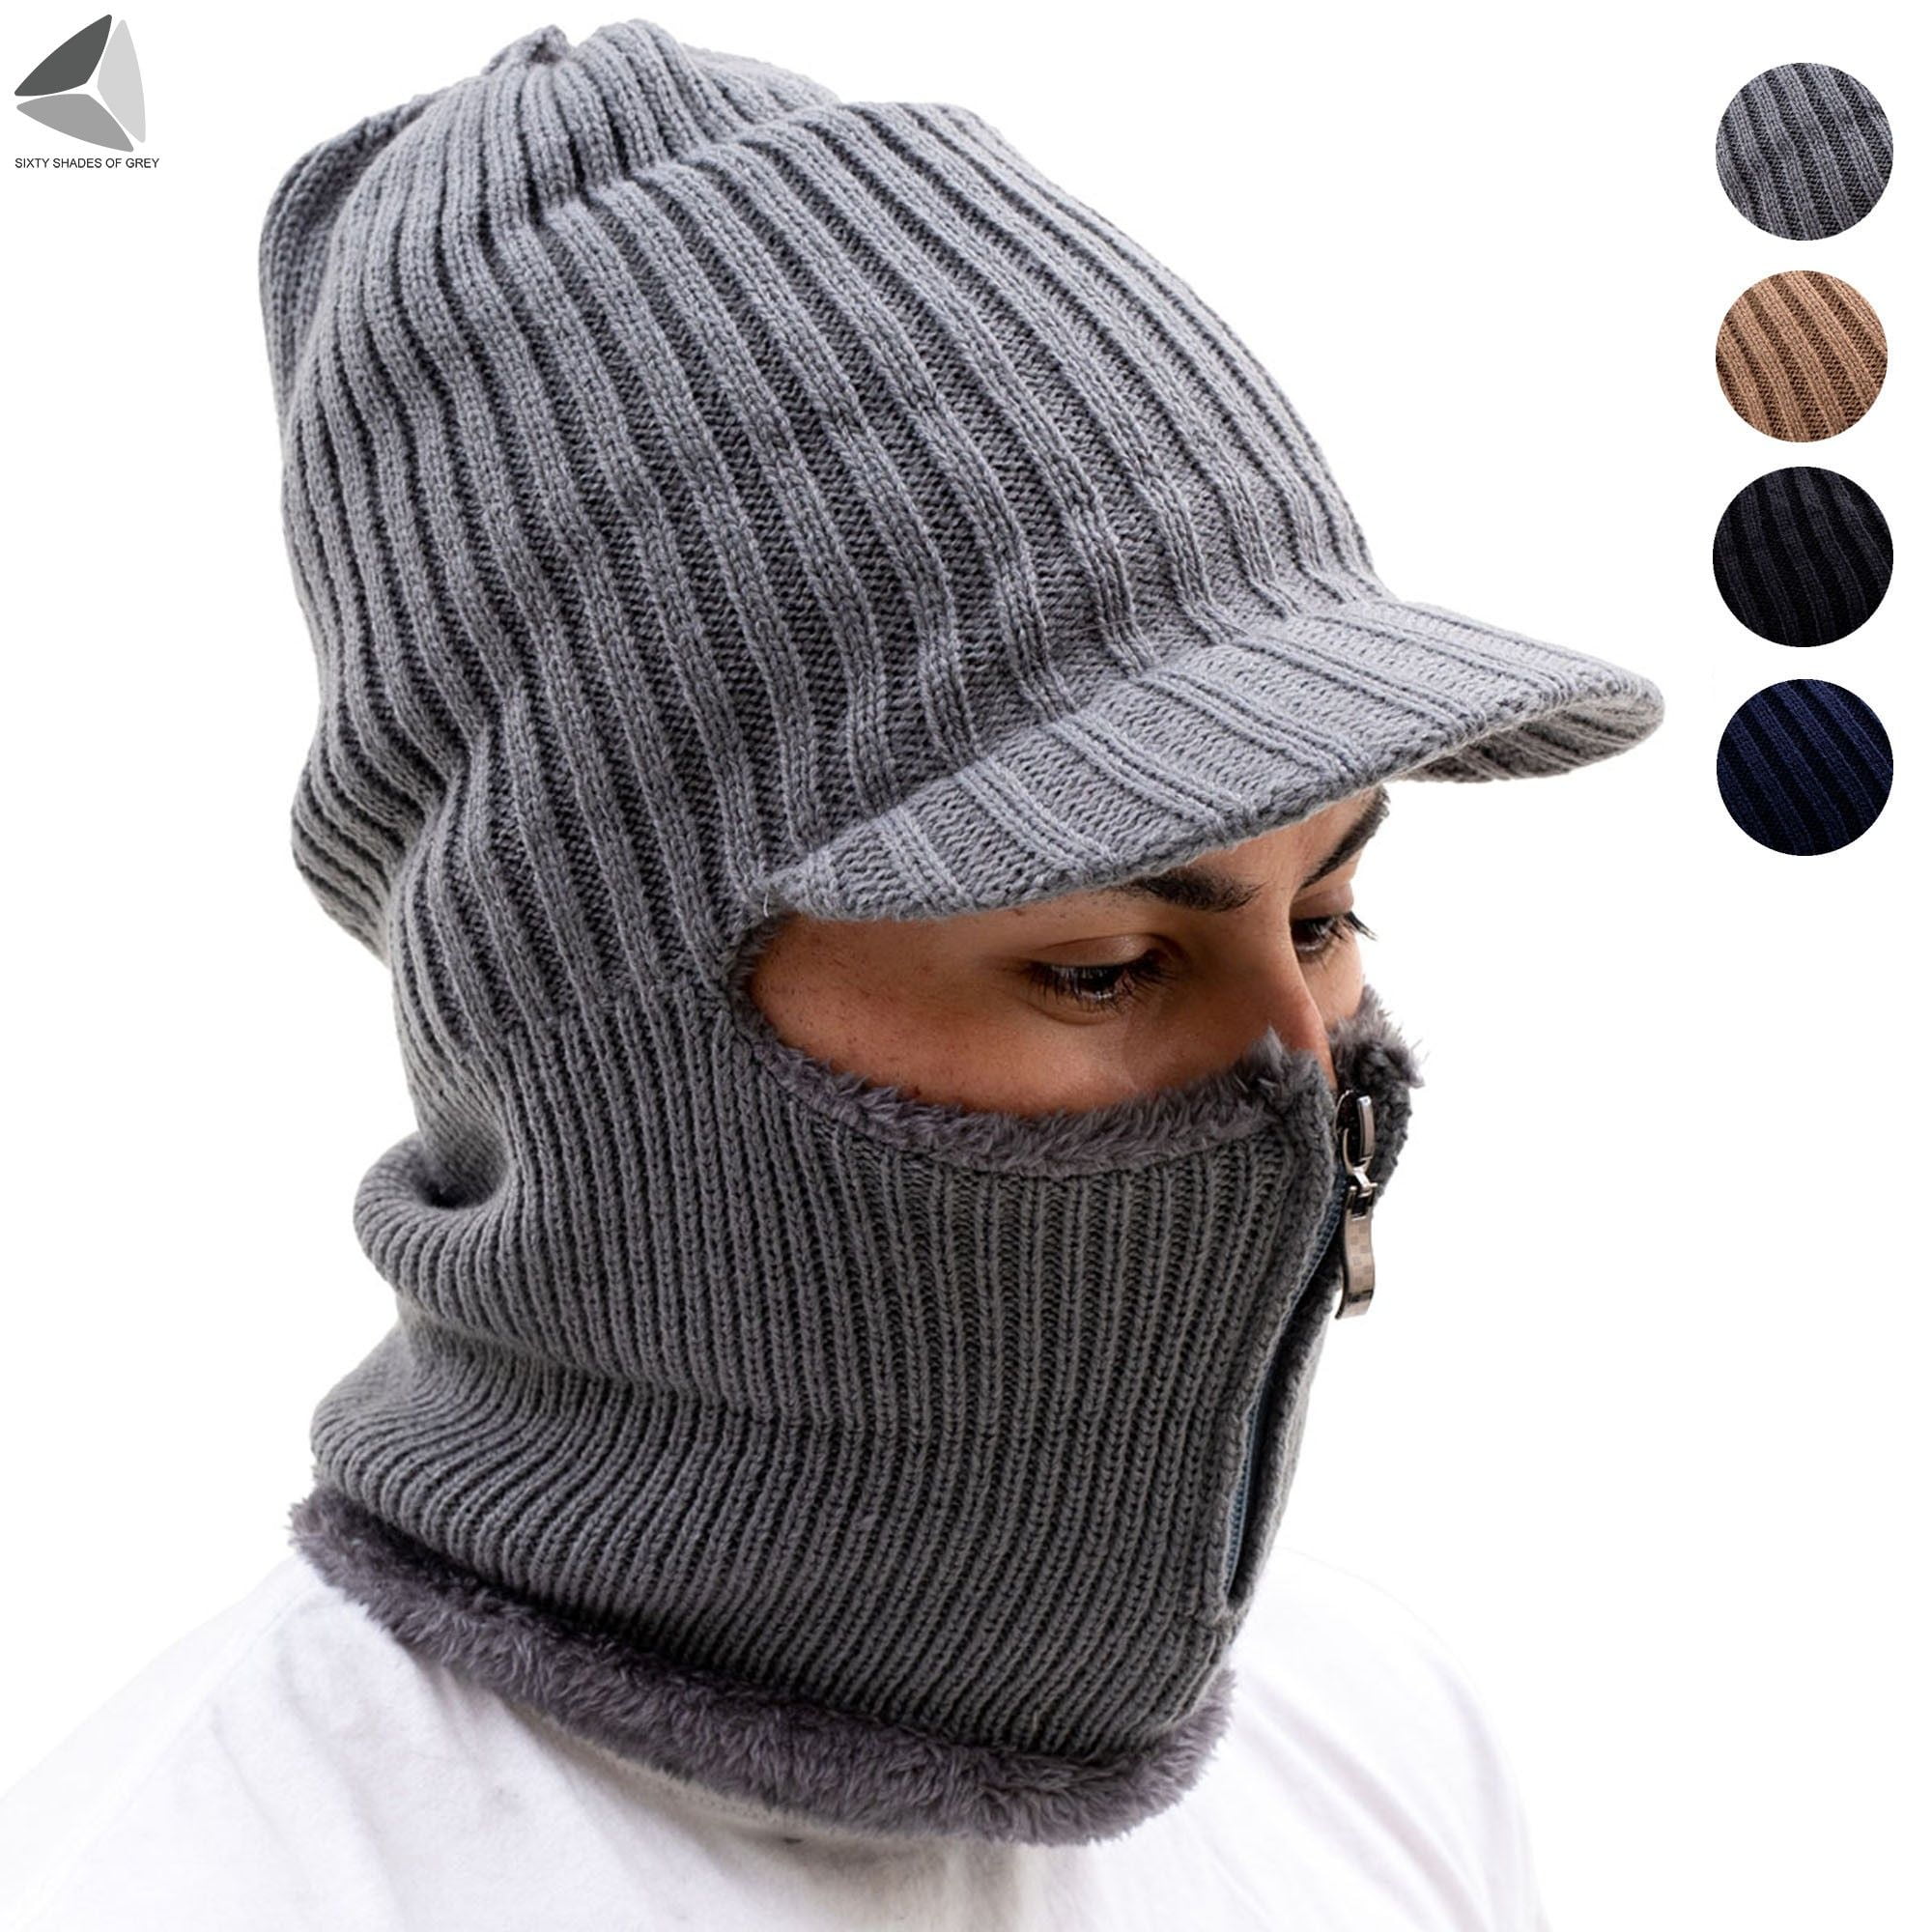 PULLIMORE Winter 3 In 1 Beanie Knit Hats for Women Men Fleece Lined Warm  Skull Caps with Zipper Face Mask and Ear Flap for Cycling Skiing Running  (Khaki) 